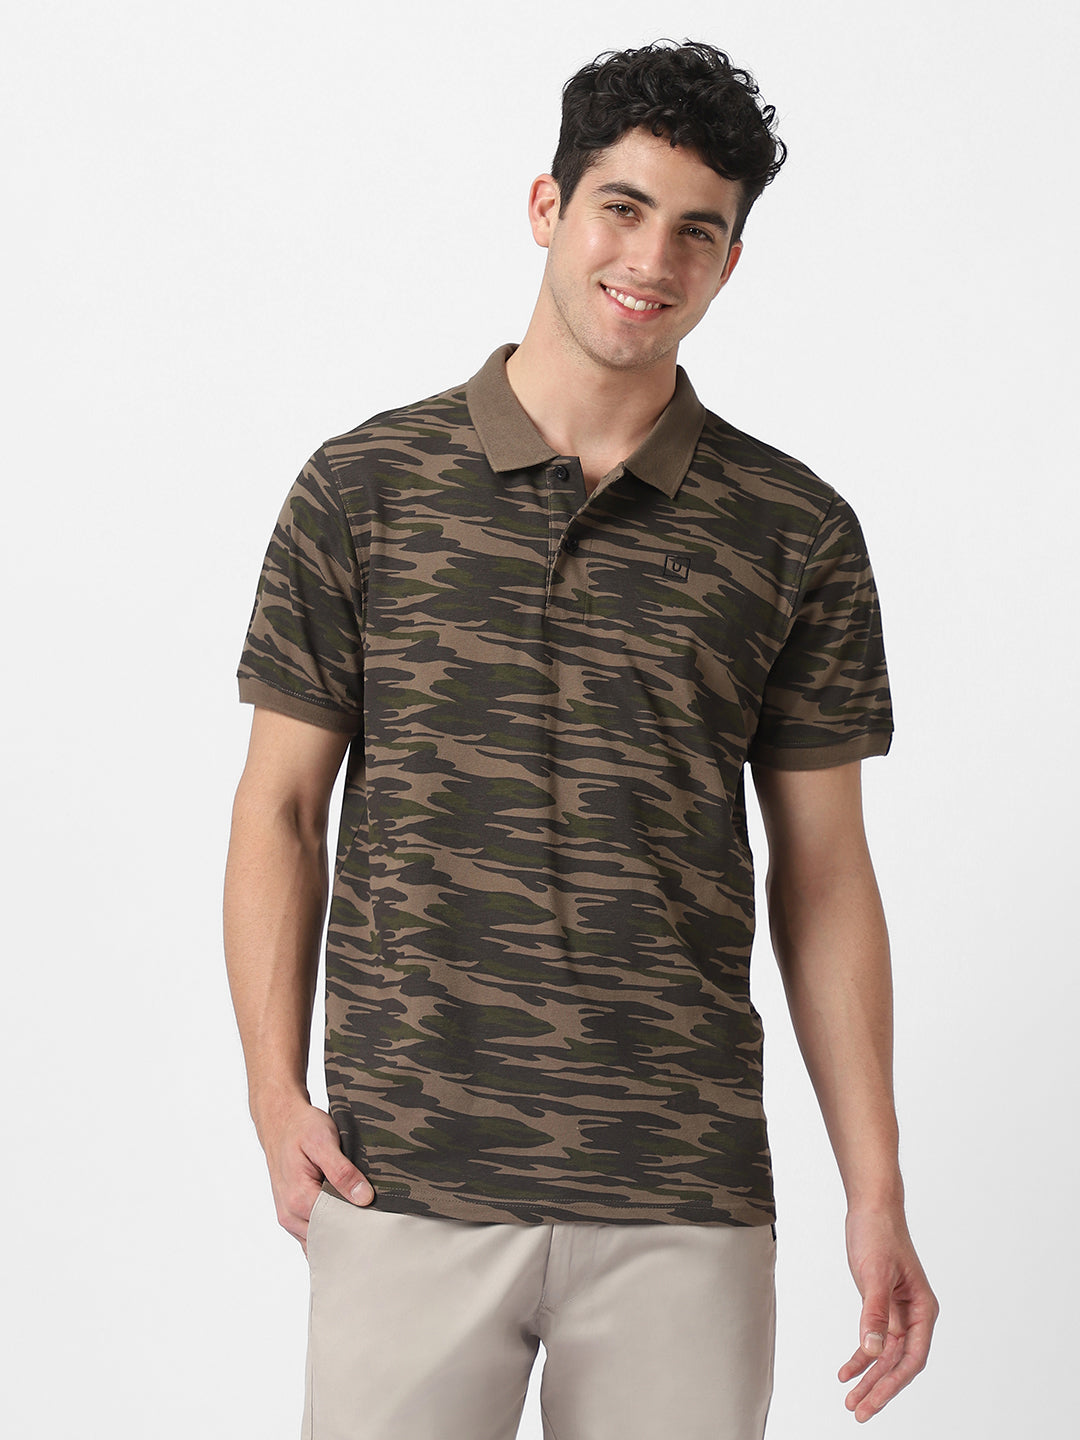 Men's Green, Dark Green Military Camouflage Printed Slim Fit Cotton Polo T-Shirt